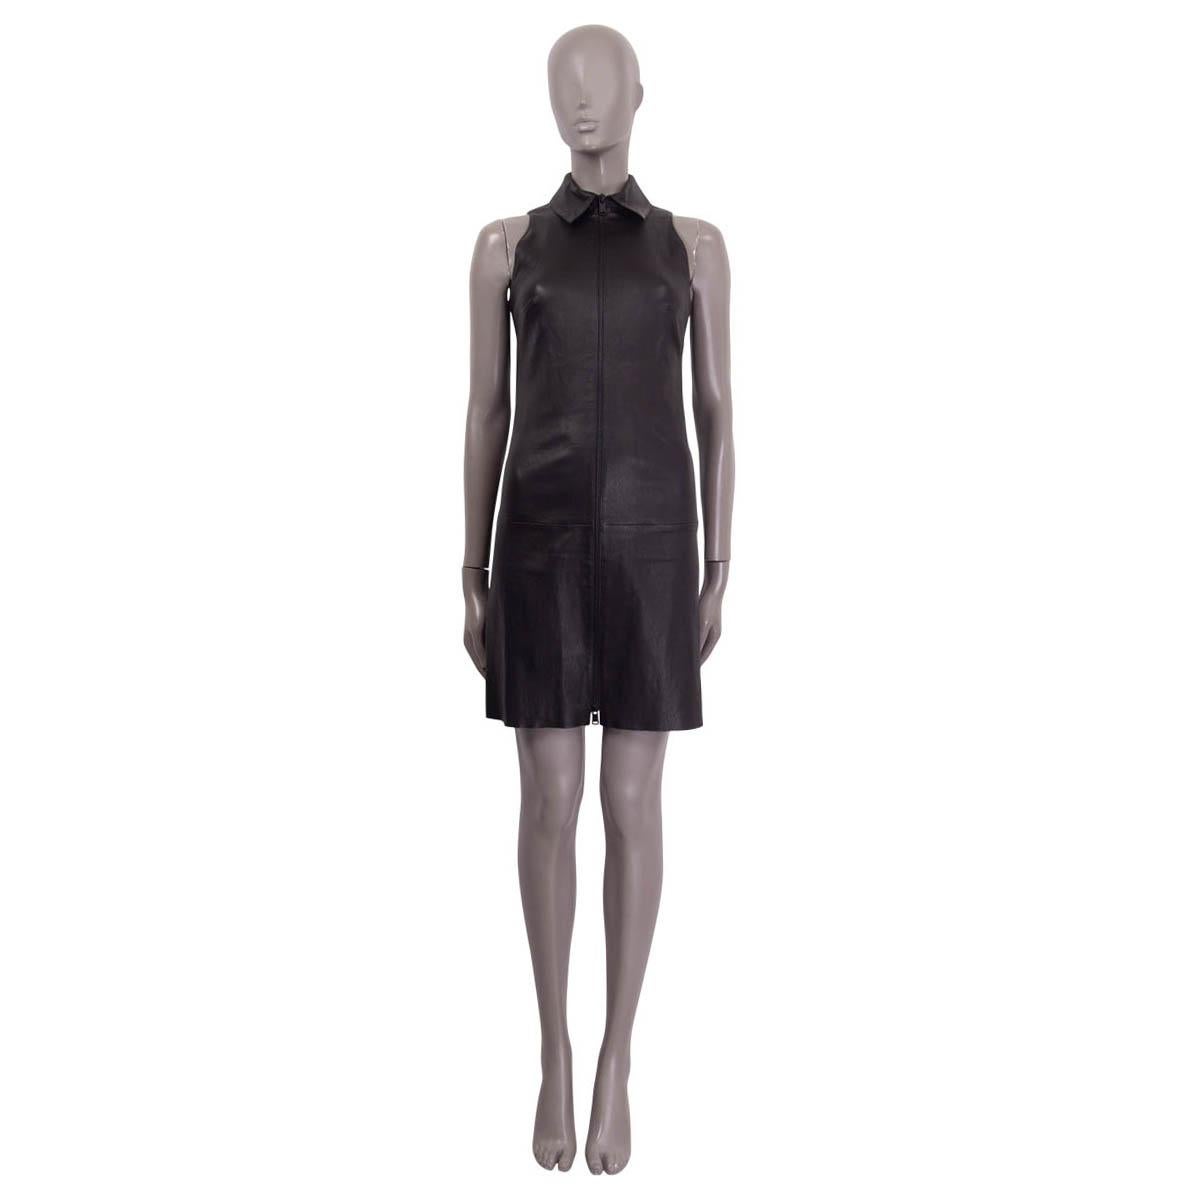 100% authentic Jitrois sleeveless dress in black lambskin (100%). Features a classic collar and opens with a full length front zipper. Lined in black cotton (97%) and spandex (3%). Has been worn and is in excellent condition.

Measurements
Tag